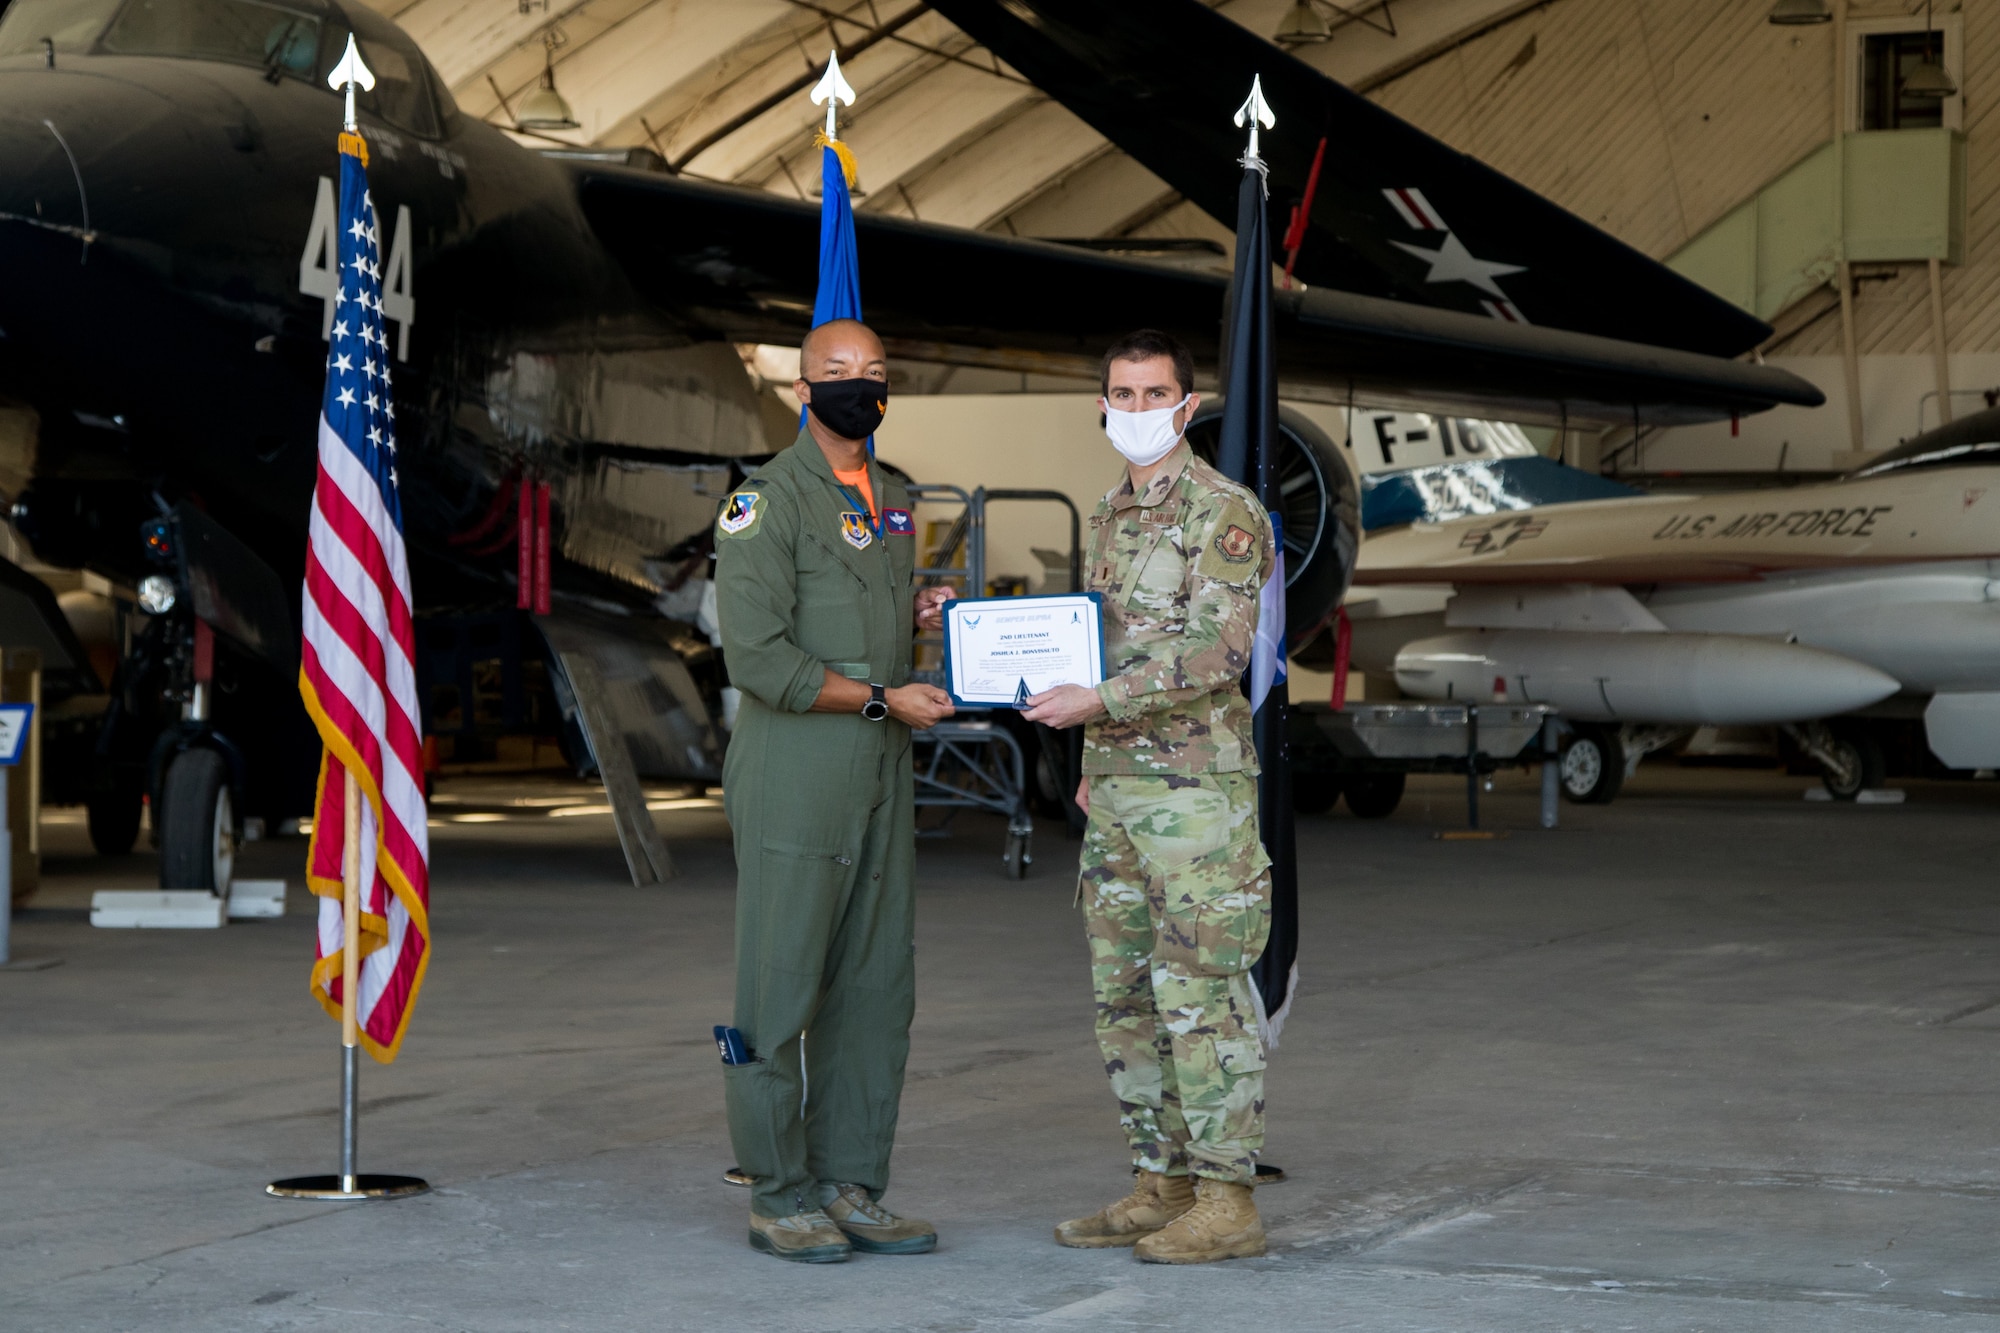 2nd Lt. Joshua Bonvisutto, Air Force Research Laboratory, originally of North Tonawanda, Ney York, accepts his U.S. Space Force certificate from Col. Randel Gordon, 412th Test Wing Vice Commander, during a Space Force Transfer Ceremony at Edwards Air Force Base, California, Feb. 11. (Air Force photo by Richard Gonzales)